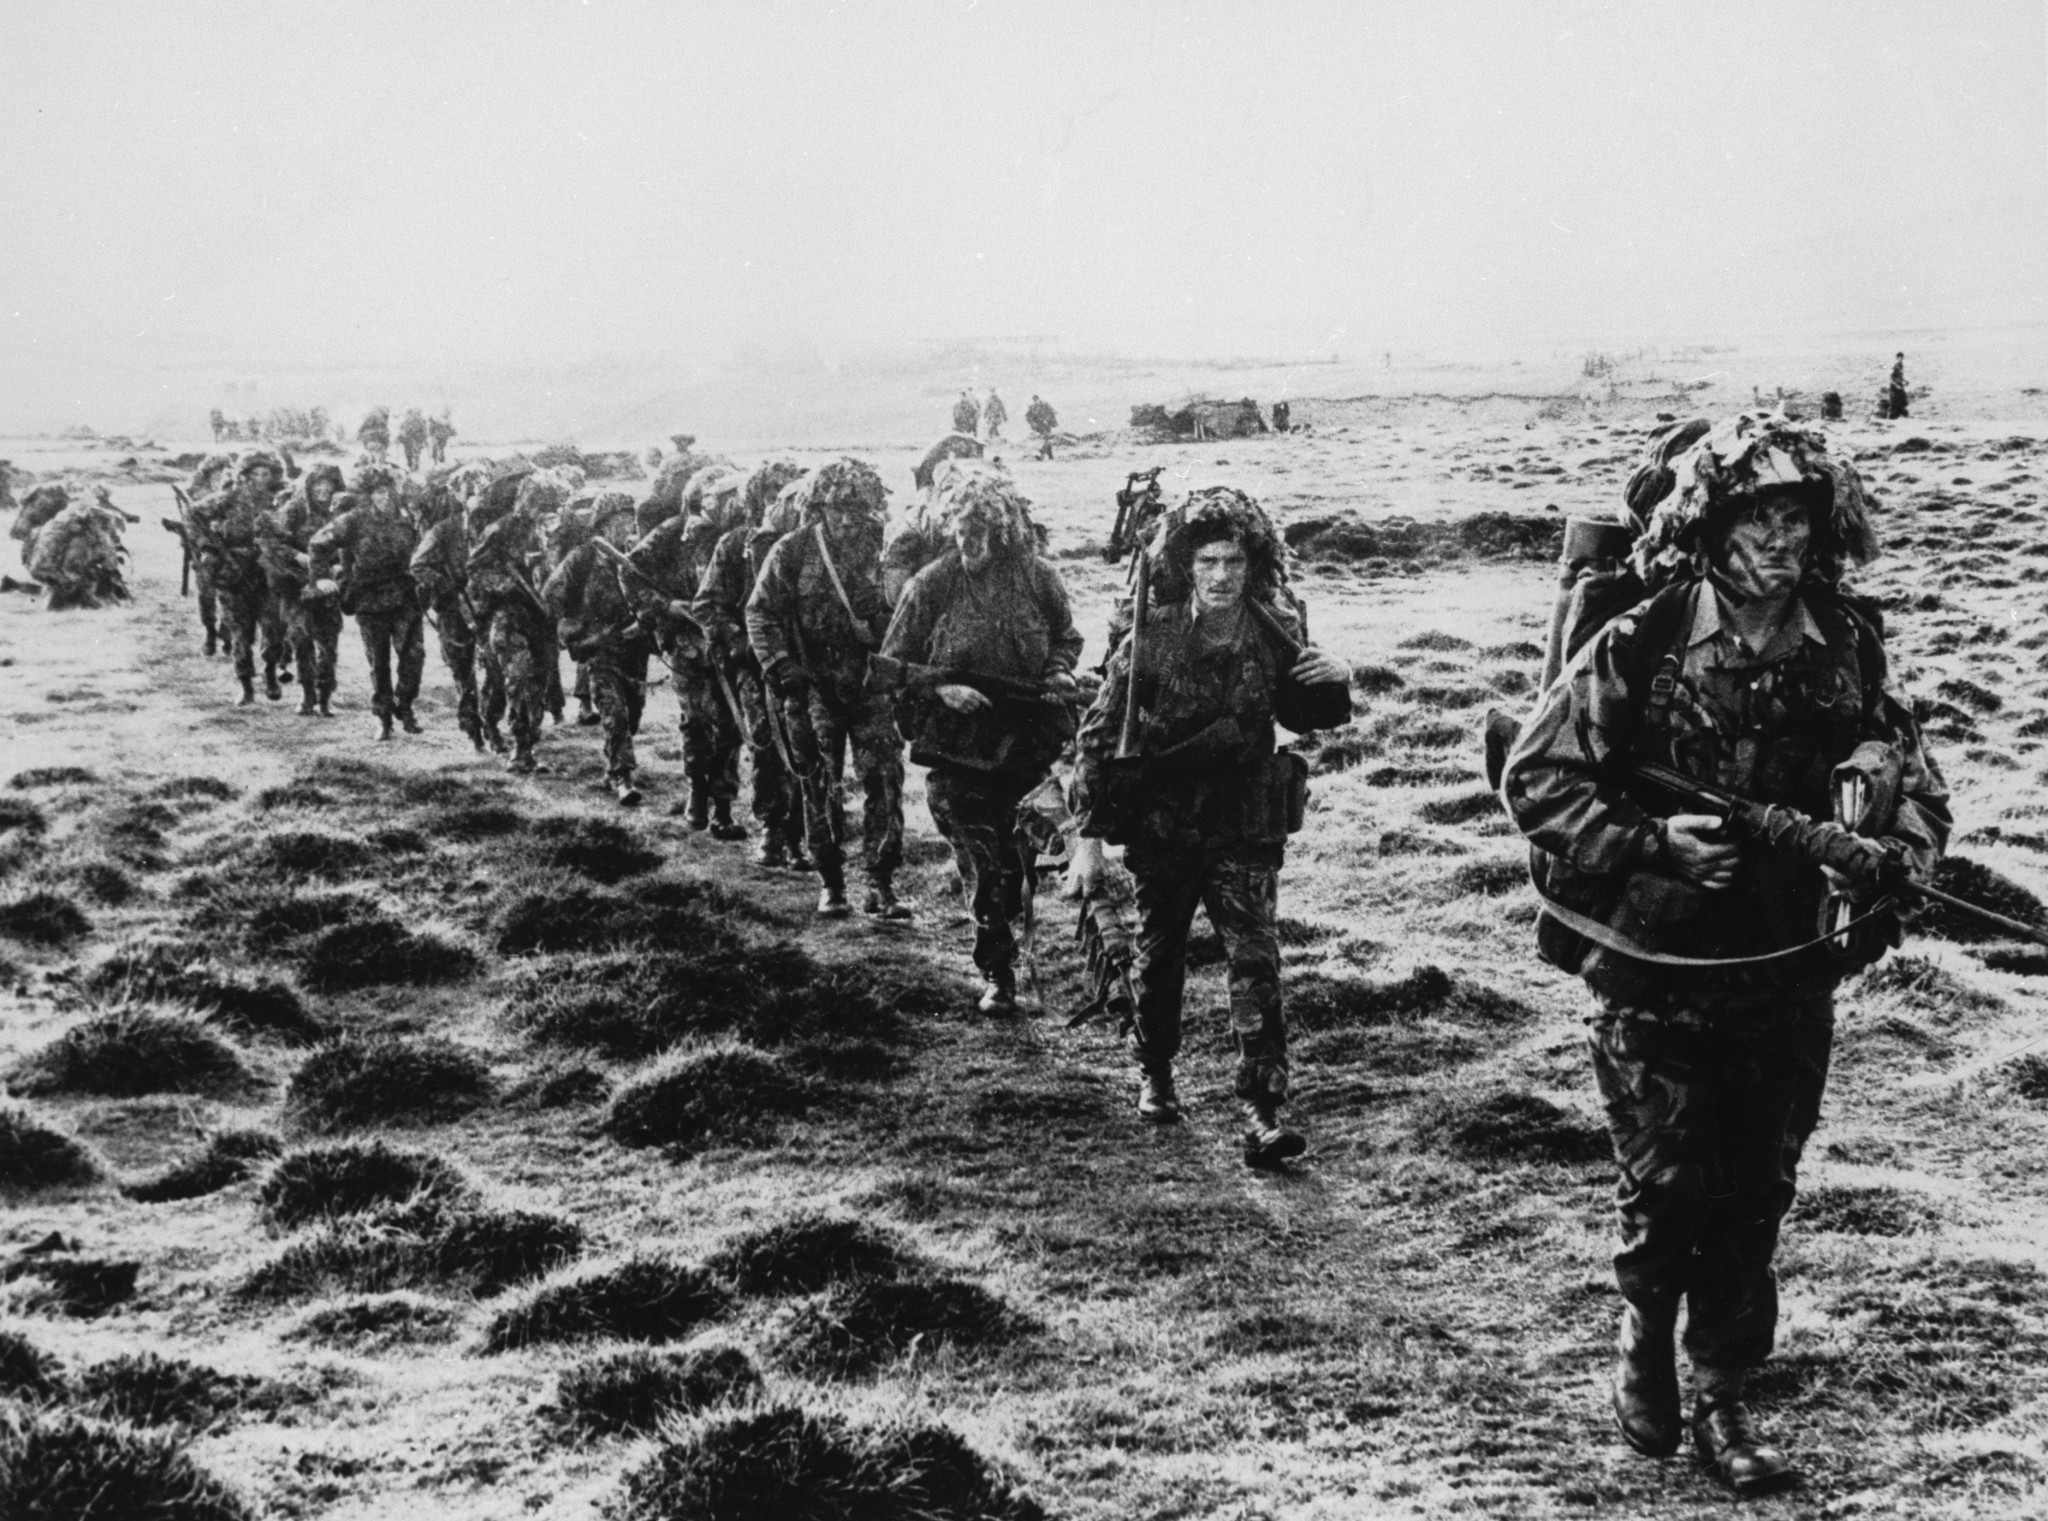 British soldiers on a march during the Falklands War in 1982 ©Getty Images